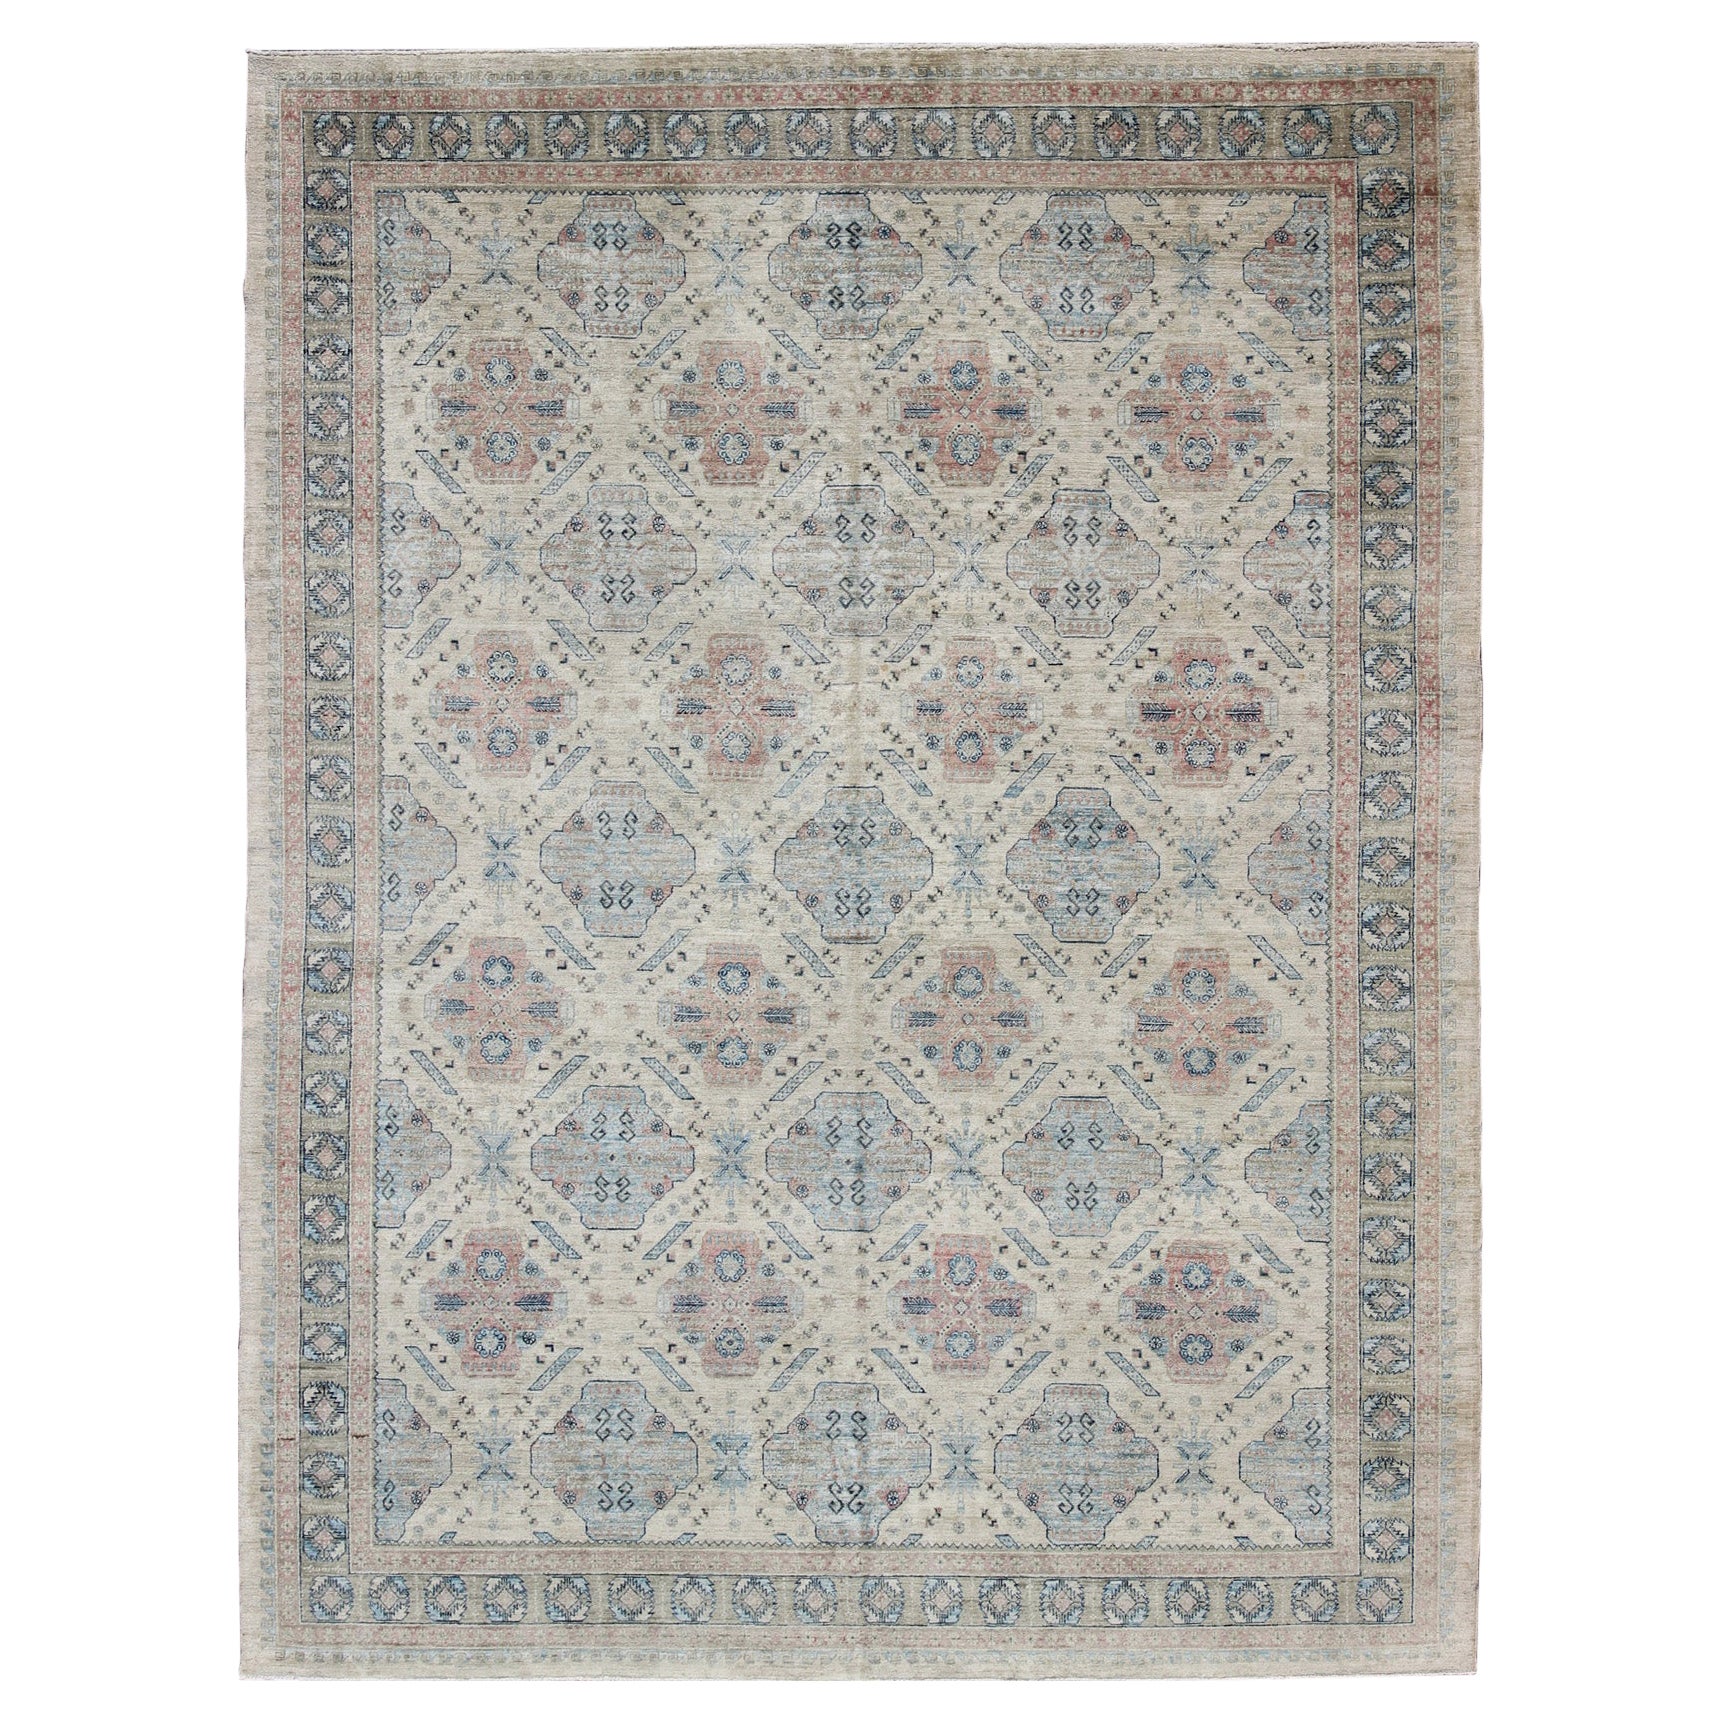  Afghan Khotan Rug with All-Over Geometric Pattern in Pink and Light Blue